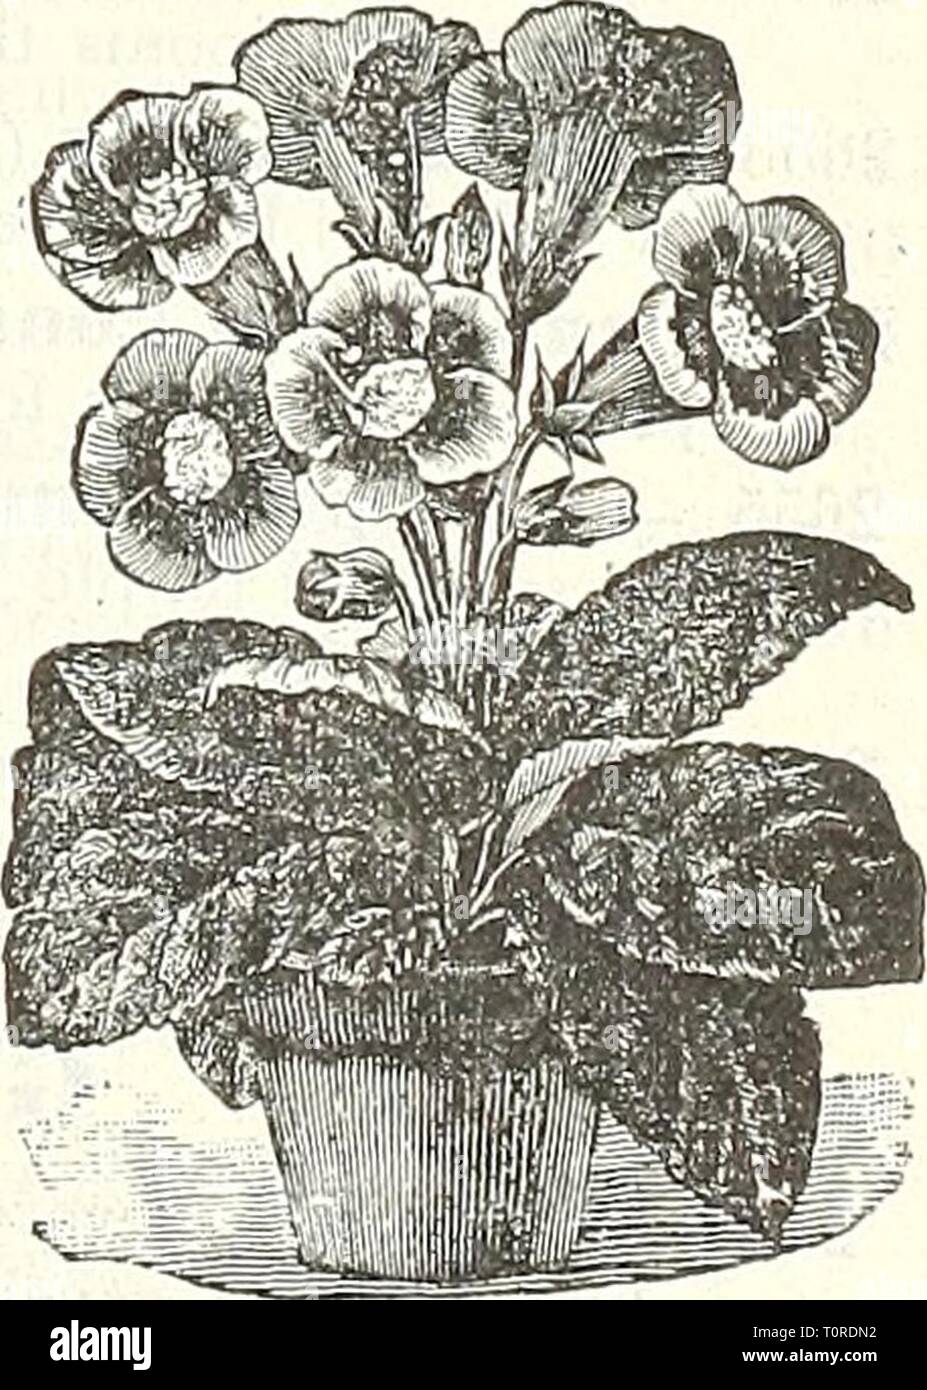 Dreer's garden book  1905 Dreer's garden book : 1905  dreersgardenbook1905henr Year: 1905  Splendid mixed 10 Globe Amaranth. (Goinplirena.) Popularly known as ' Bachelor's Buttons.' a first-rate bedding plant; flowers can be dried and used in winter bouquets. (See cut.) 2566 Aurea Superba. Golden yellow 5 2567 Nana Compacta. Red ; 1 foot 5 2570 riixed. 2 feet. Oz., 25 cts ' 5 GEOXINIA. A superb genus of greenhouse plants, jiroducing magnificent flowers of the richest colors; thrive best in an equal mixture of peat, loam and &gt;and. Sow in March. (See cut.) 2578 liybrida Grandiflora. An unsurp Stock Photo